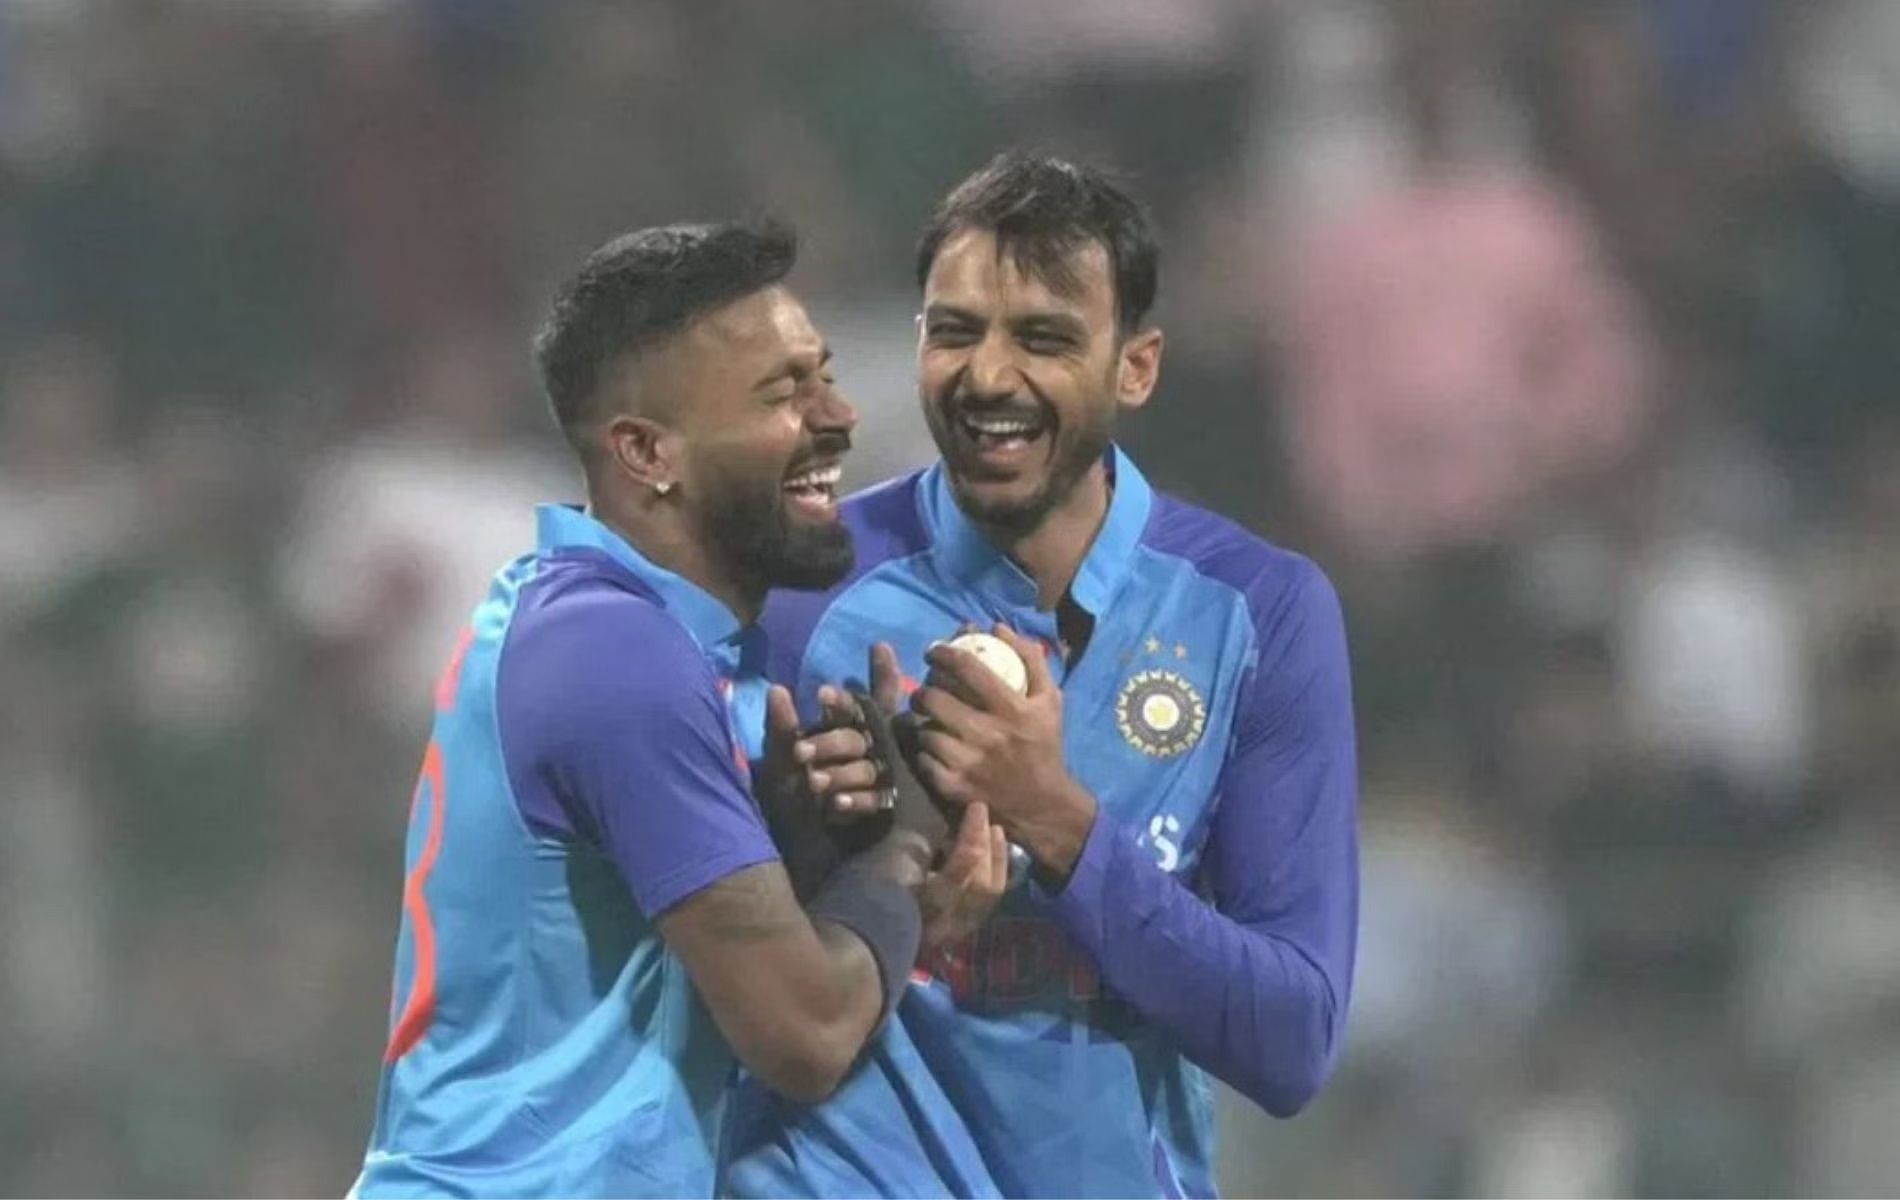 Hardik Pandya has taken some puzzling decisions on the field. [P/C: Twitter]